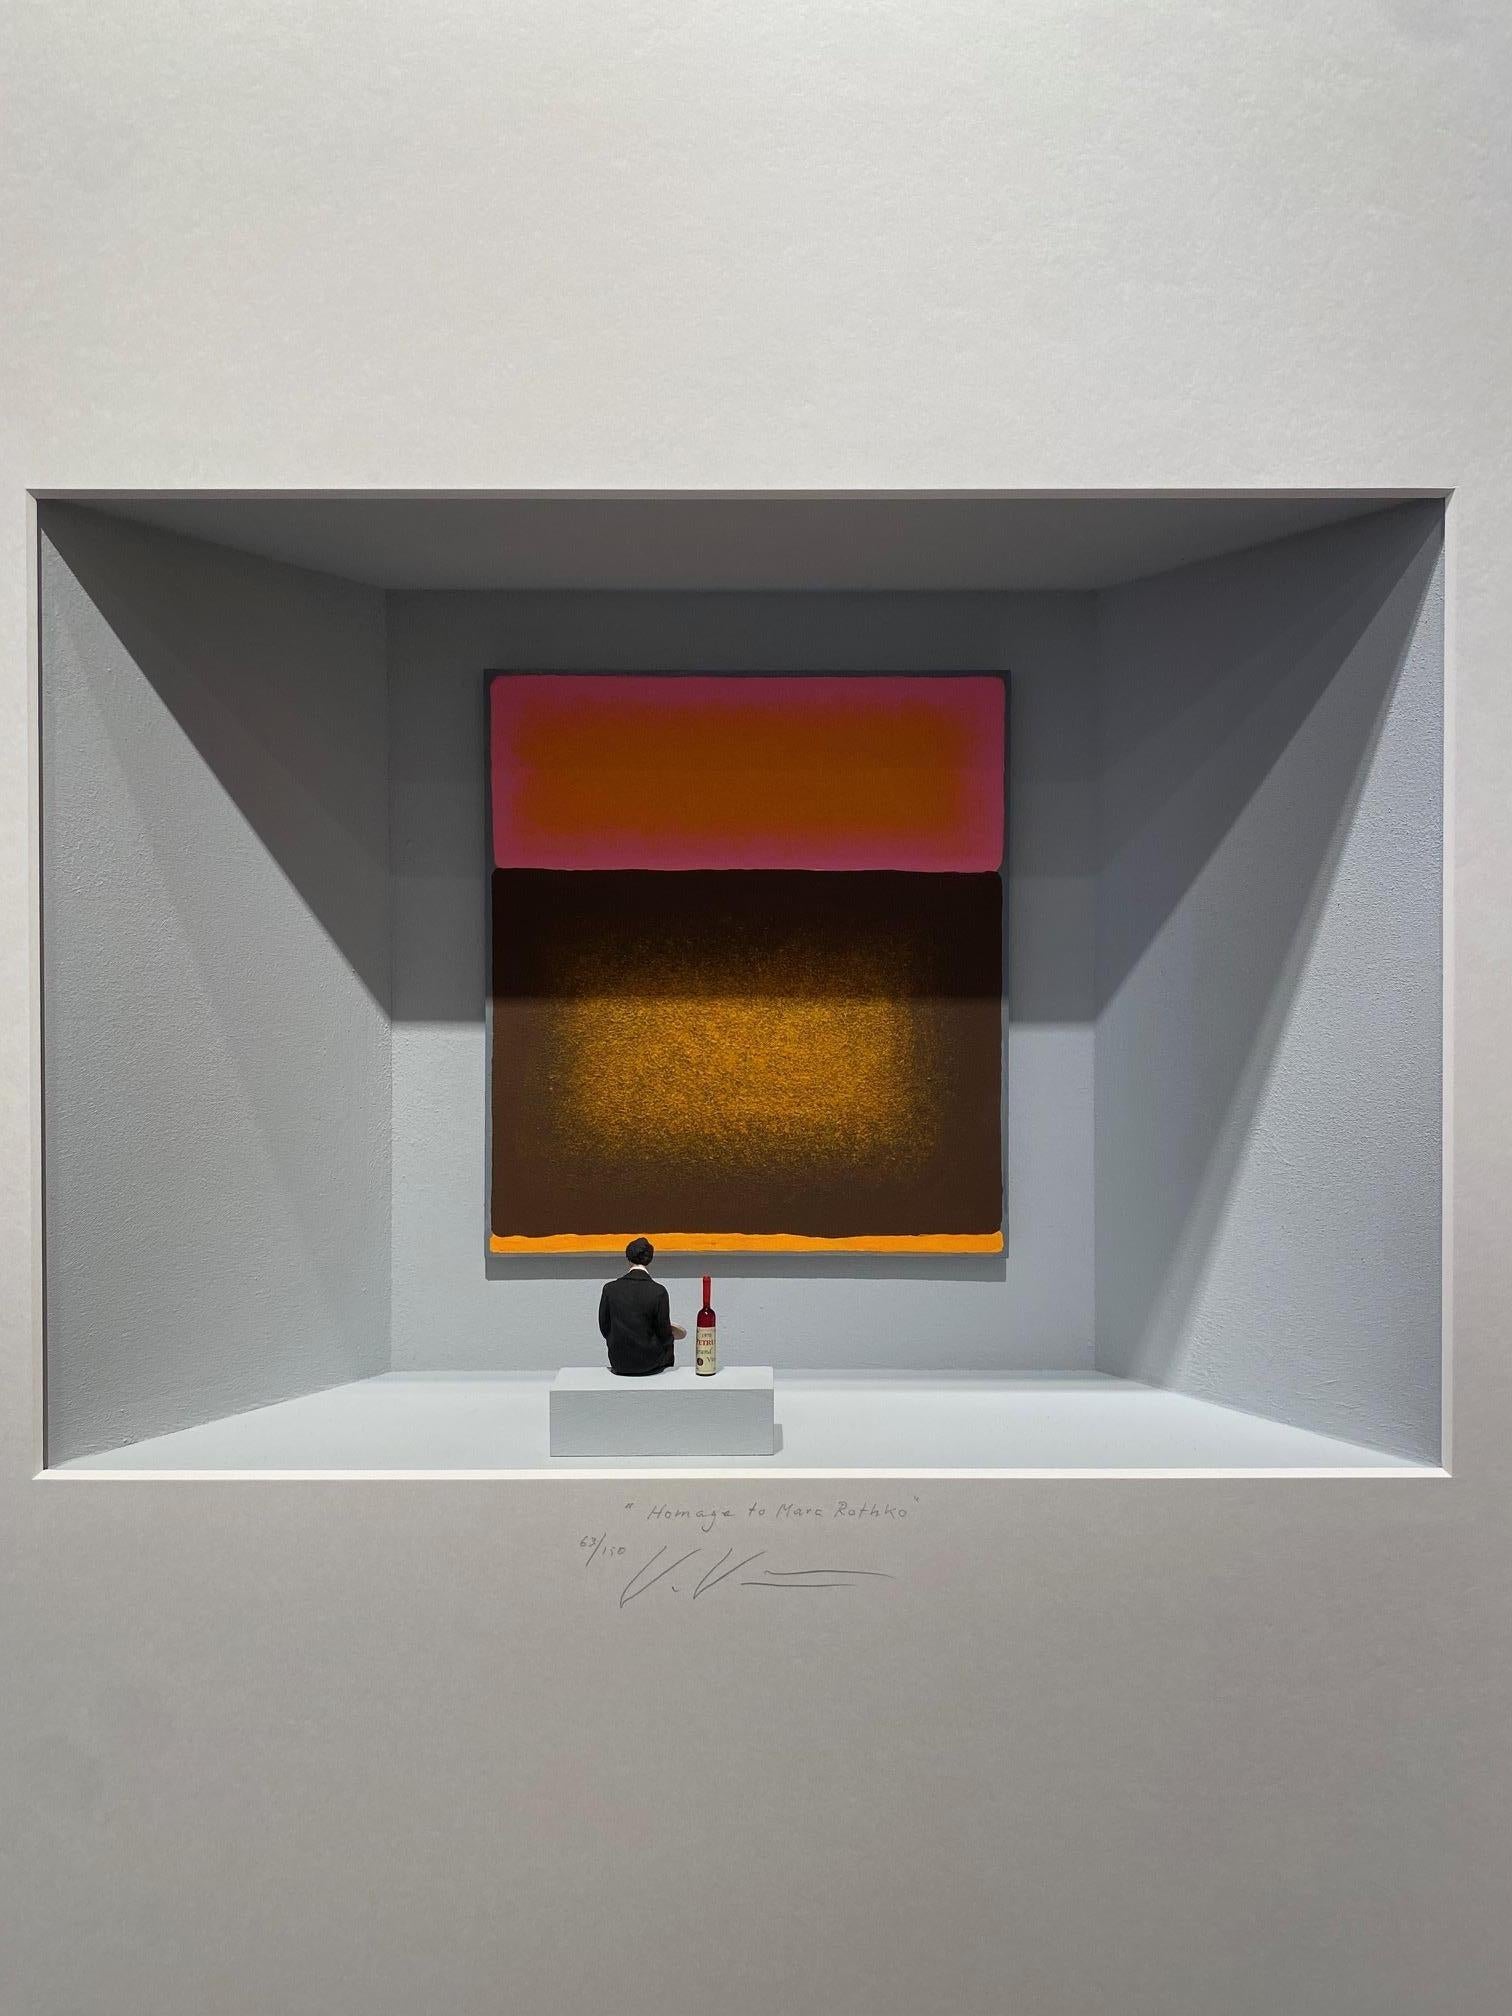 Homage to Rothko-contemporary art in boxes homage to Marc Rothko by Volker Kuhn For Sale 1